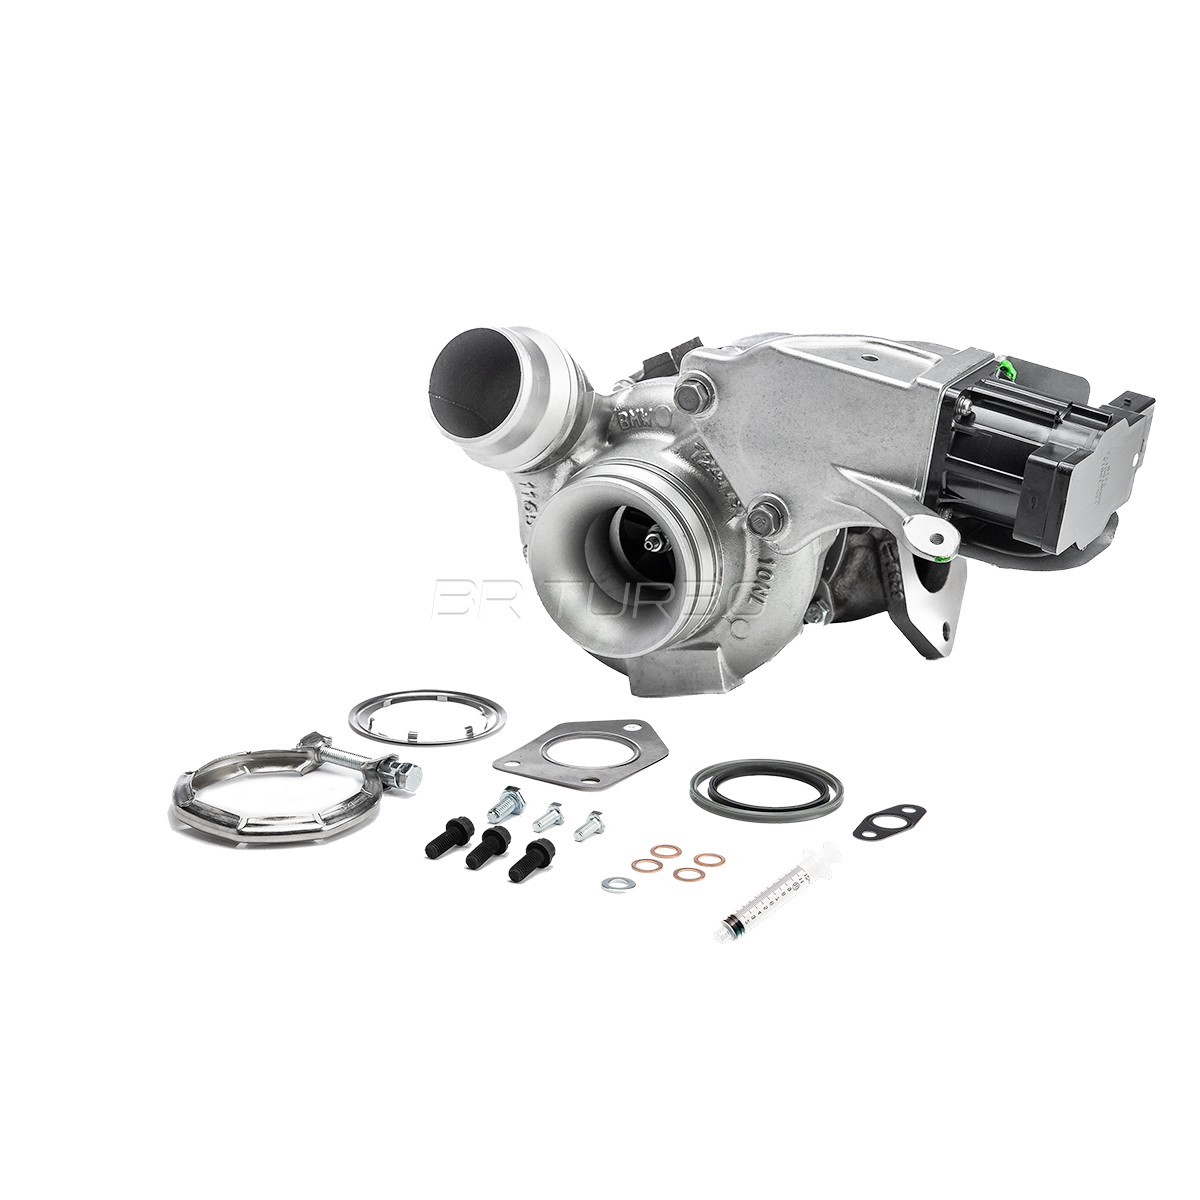 4913505895RSM Turbocharger REMANUFACTURED TURBOCHARGER WITH MOUNTING KIT BR Turbo 4913505895RSM review and test